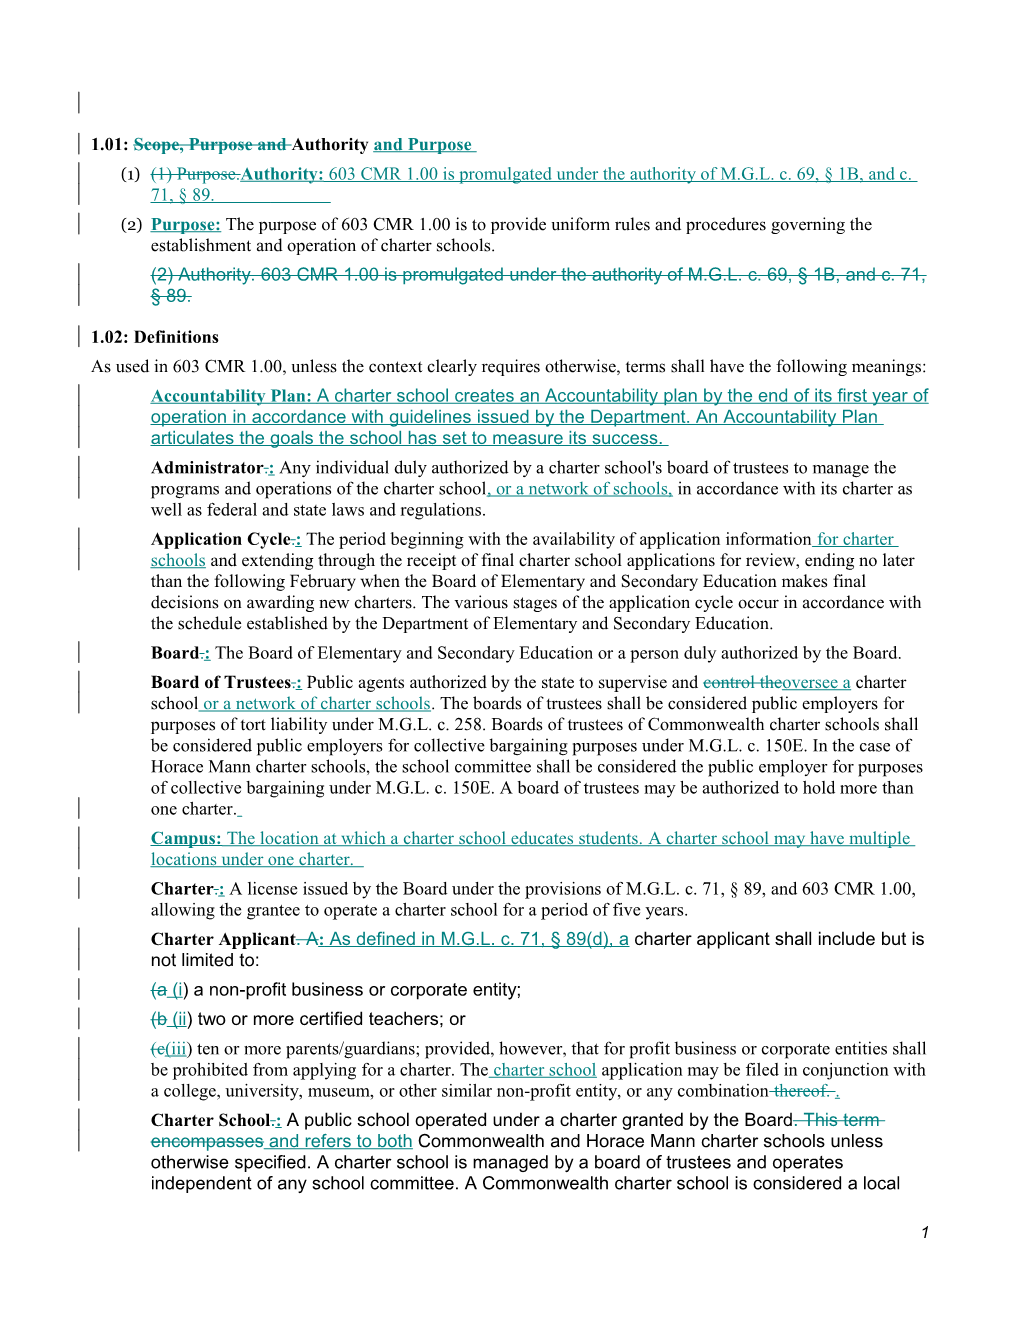 Proposed Amendments to Charter School Regulations, 603 CMR 1.00, Tracked Changes Version